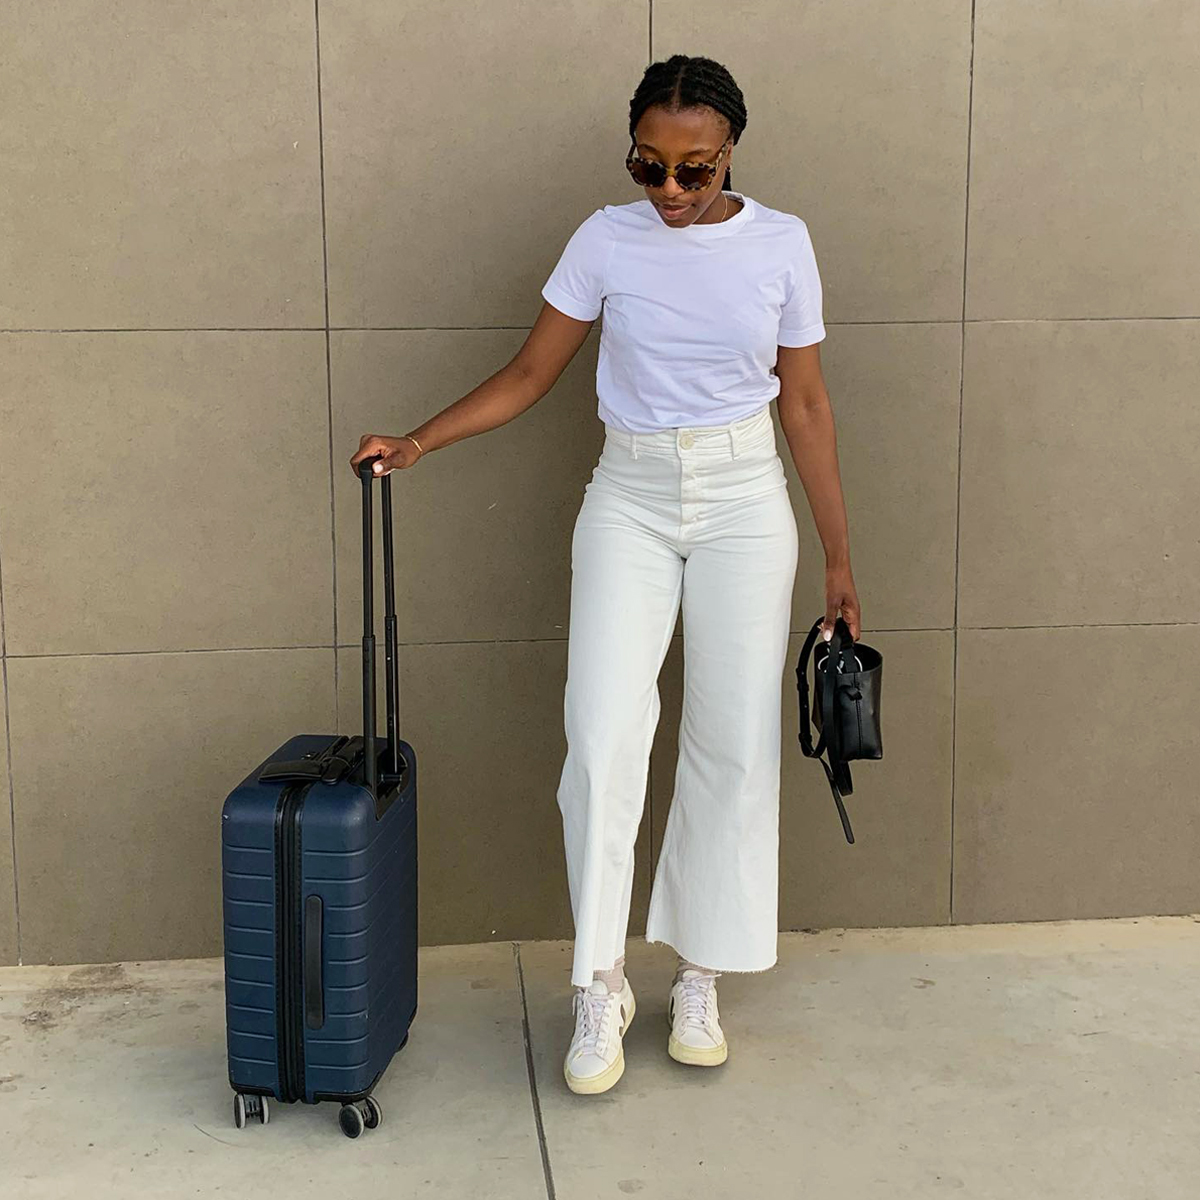 Best (+ Comfiest!) Travel Outfit